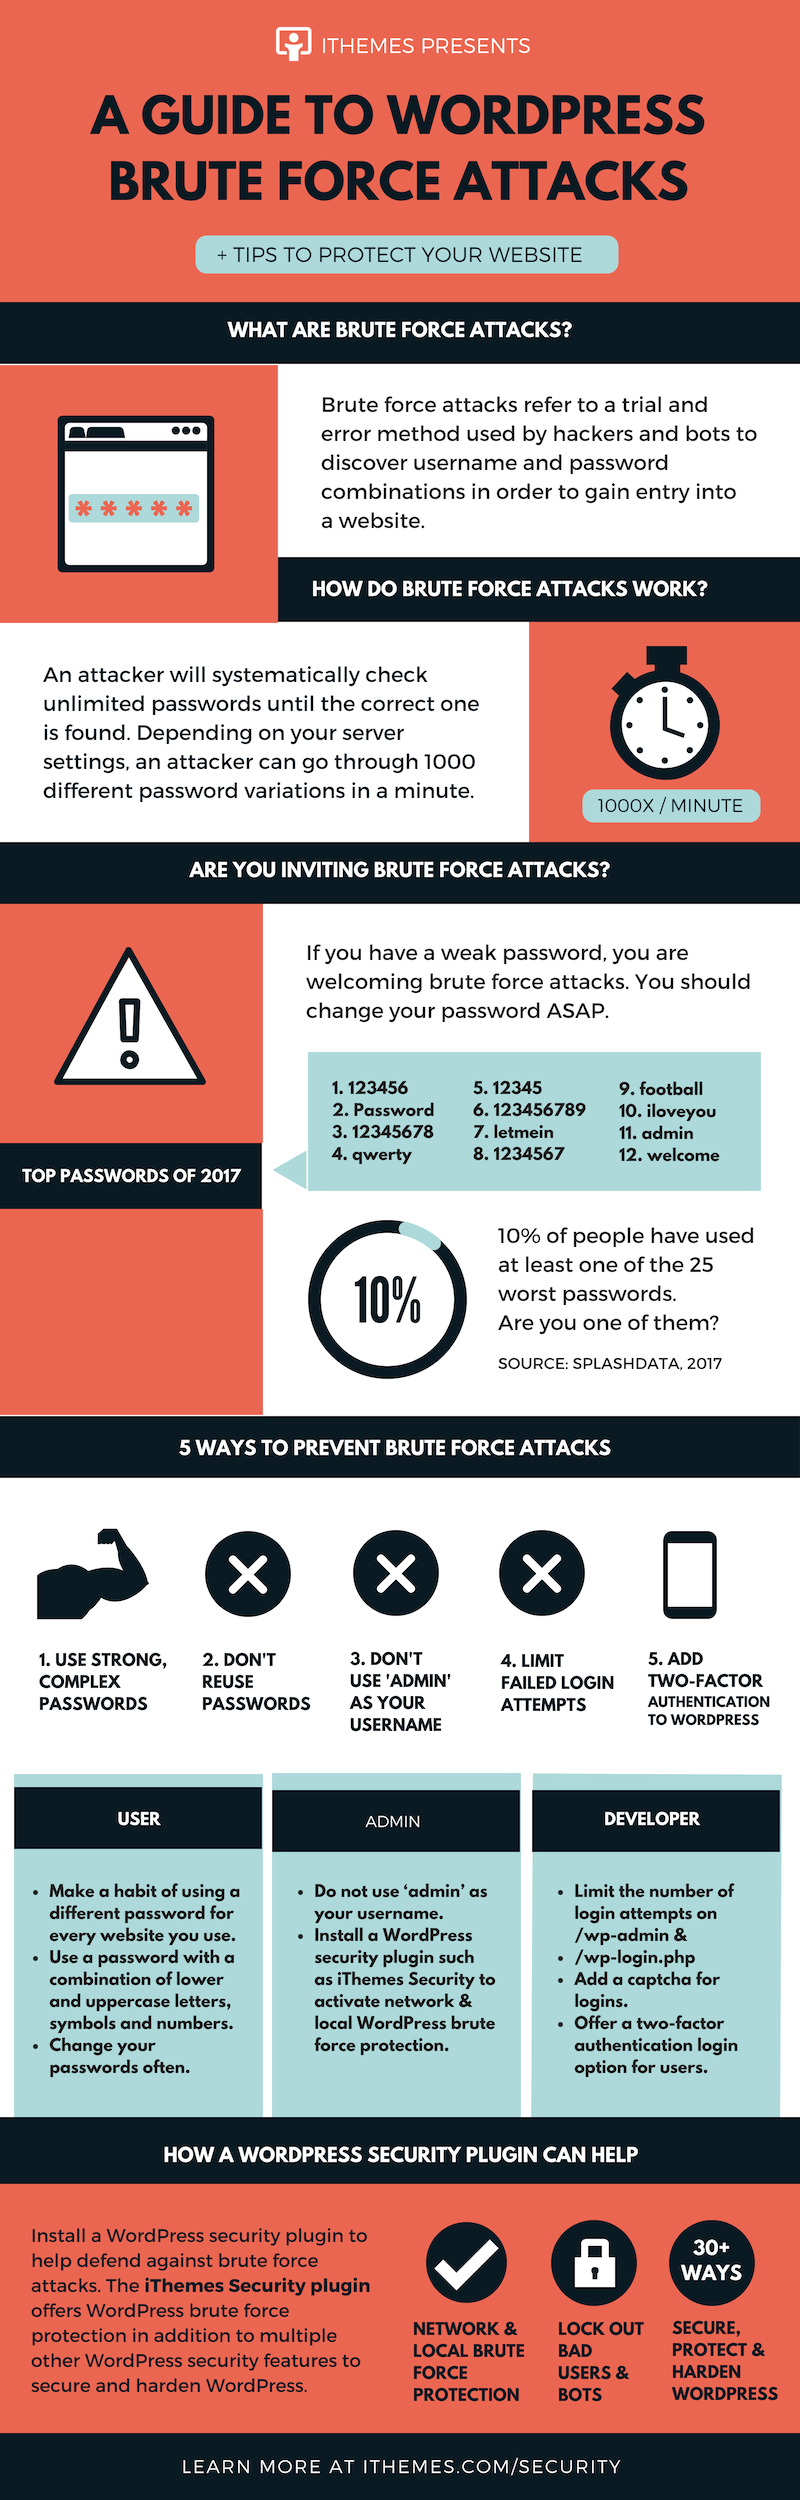 Brute Force Attacks: What They Are & How to Prevent Them